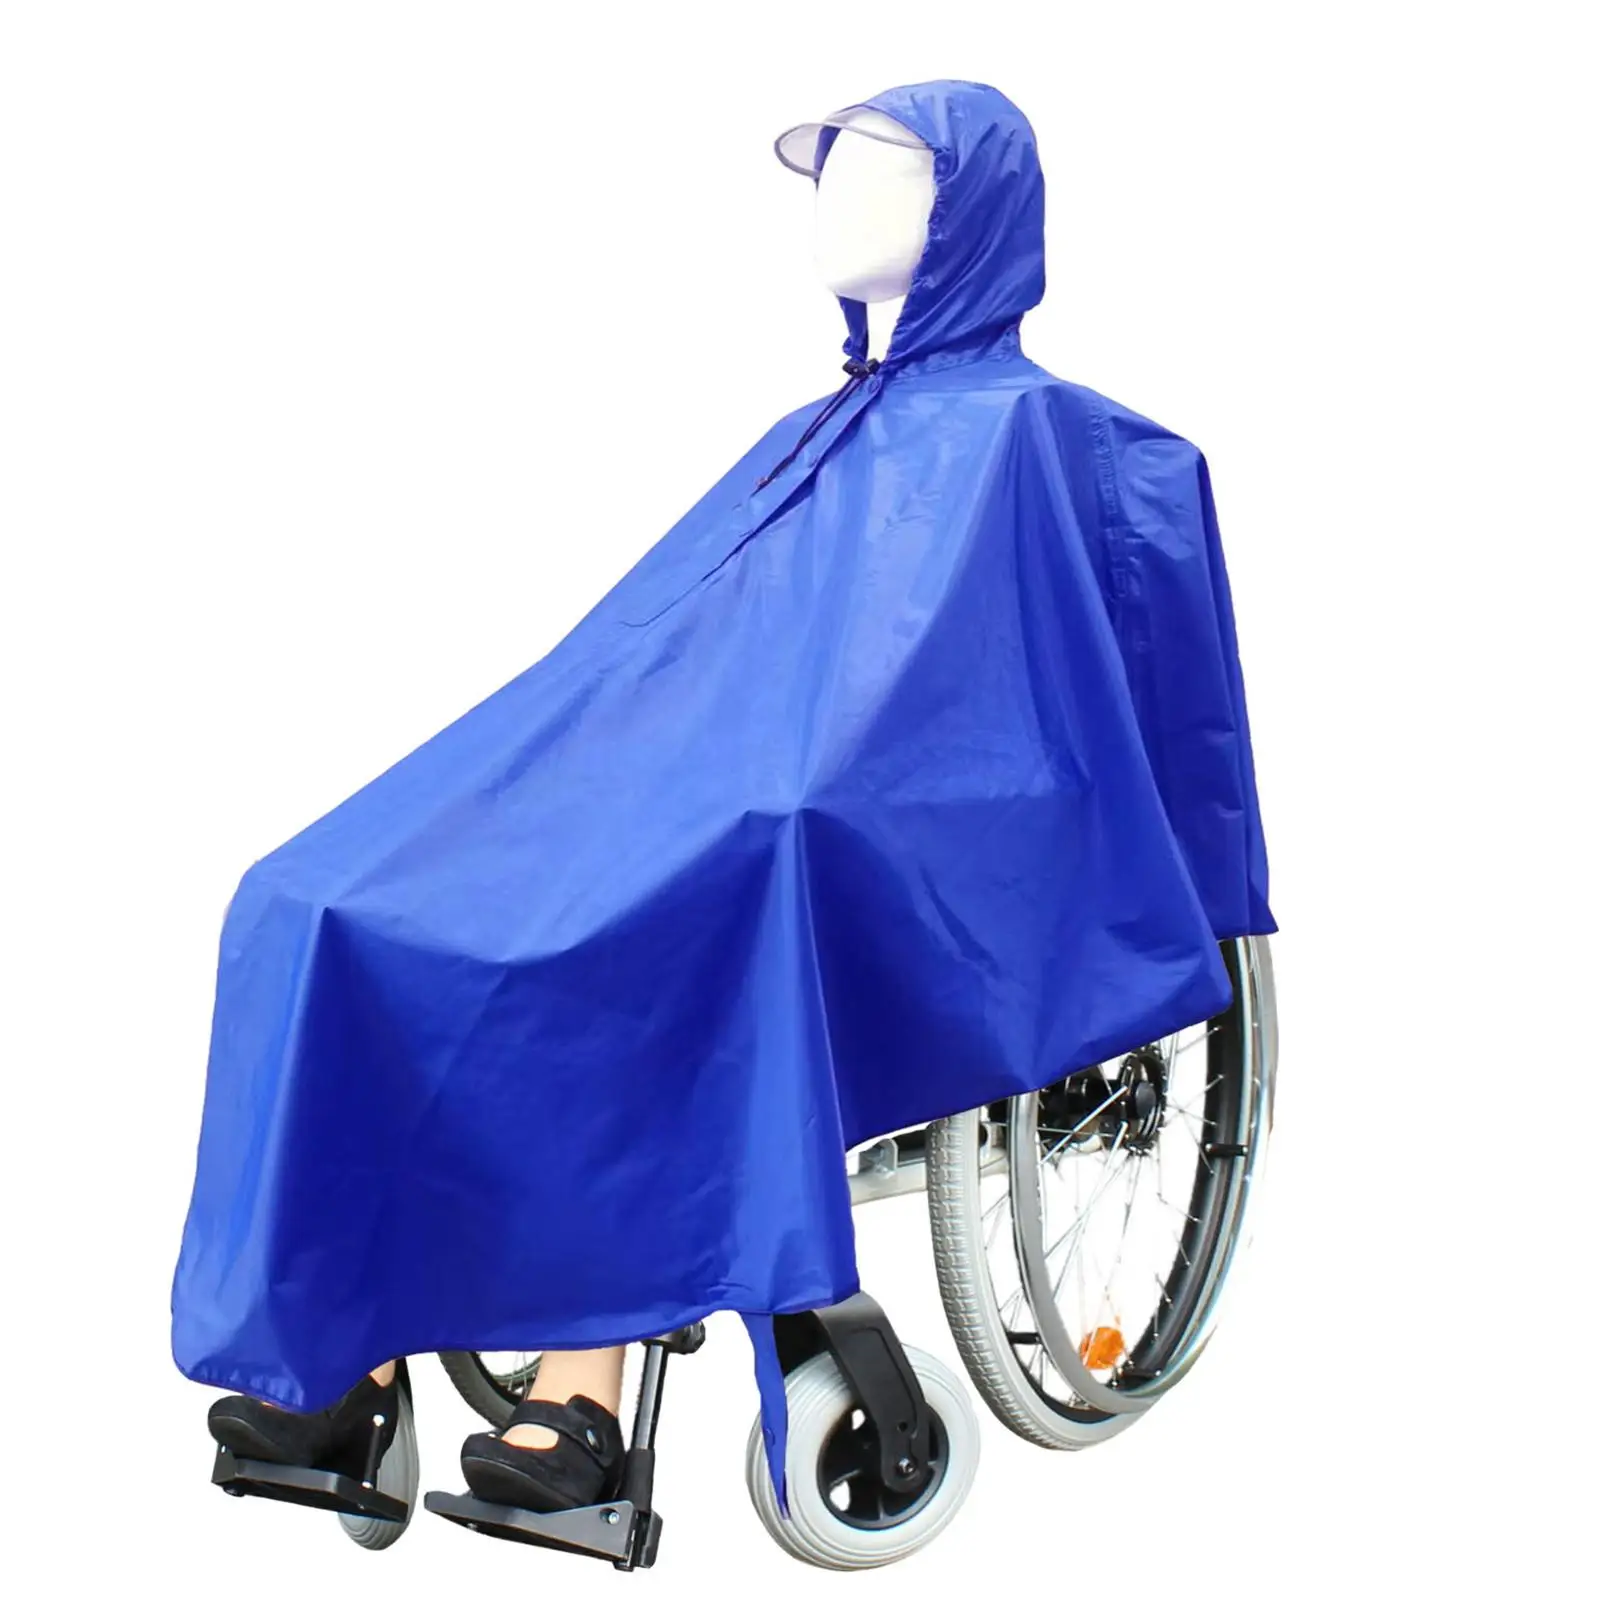 Wheelchair Poncho Reflective Strip Portable Adjustable Rain Protection Cape for Camping Activity Rainy Day Travel Birthday Gift